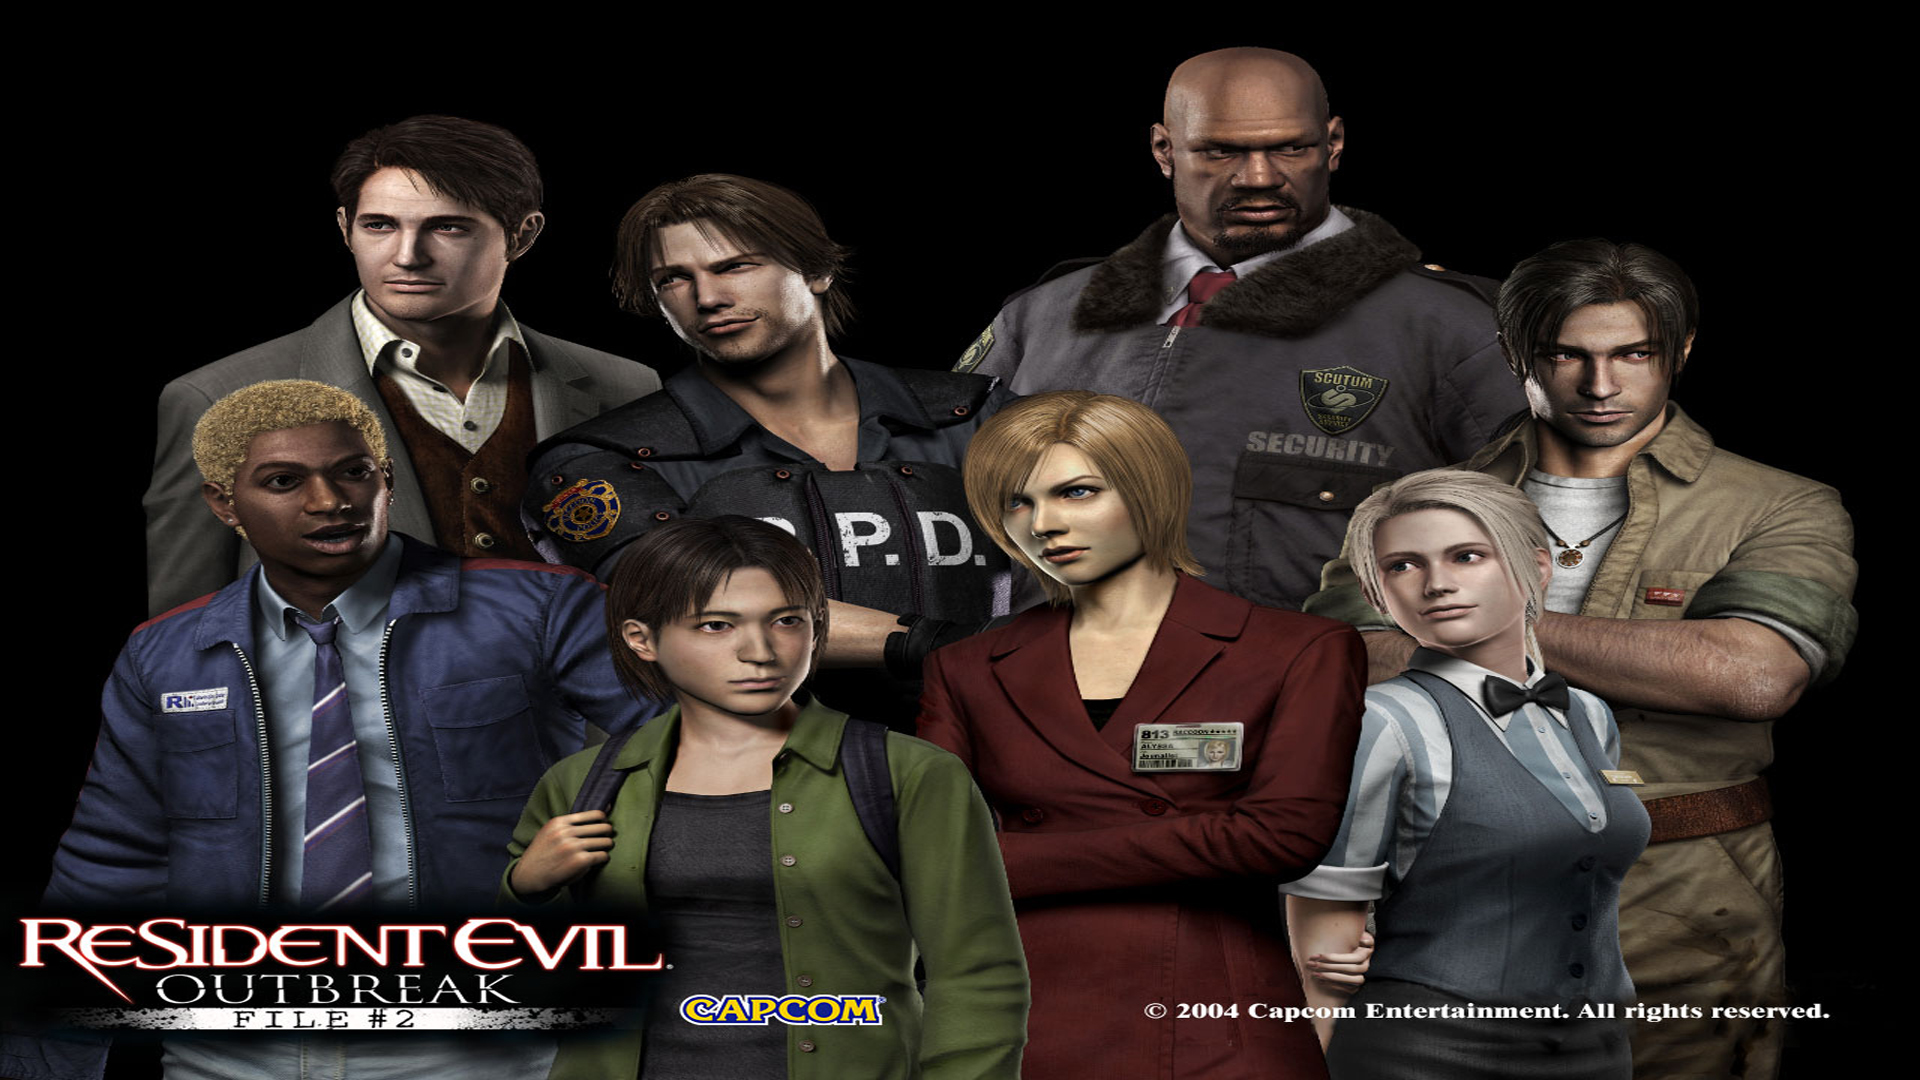 Video Game Resident Evil Outbreak: File #2 HD Wallpaper | Background Image